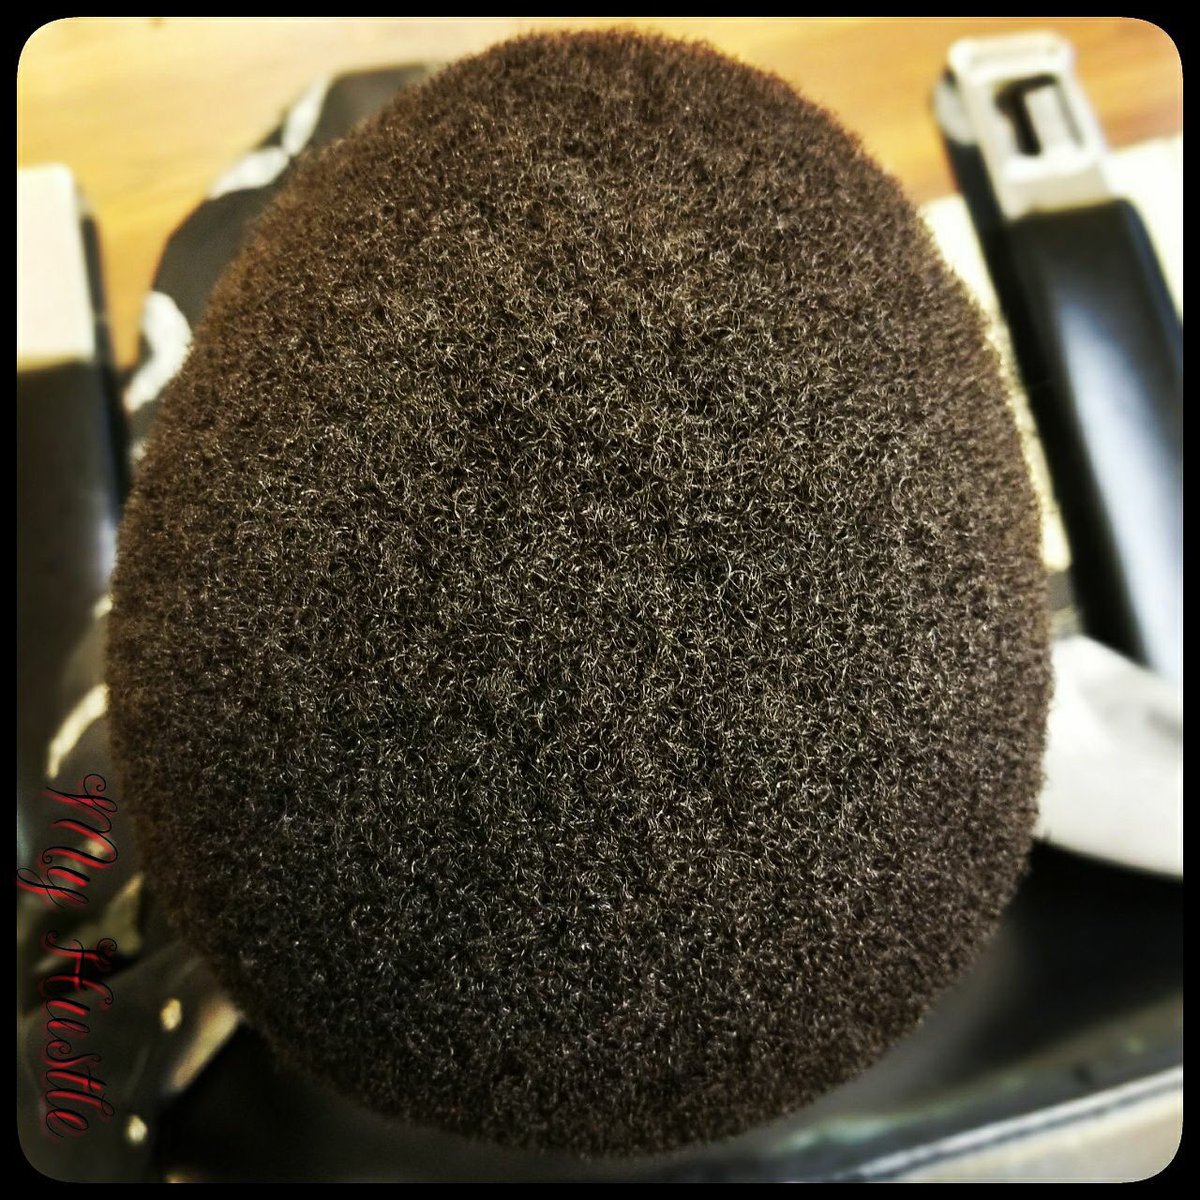 Afro perfection come book your appointment today with philly cuts #undisputedBarbershop #sumterSC